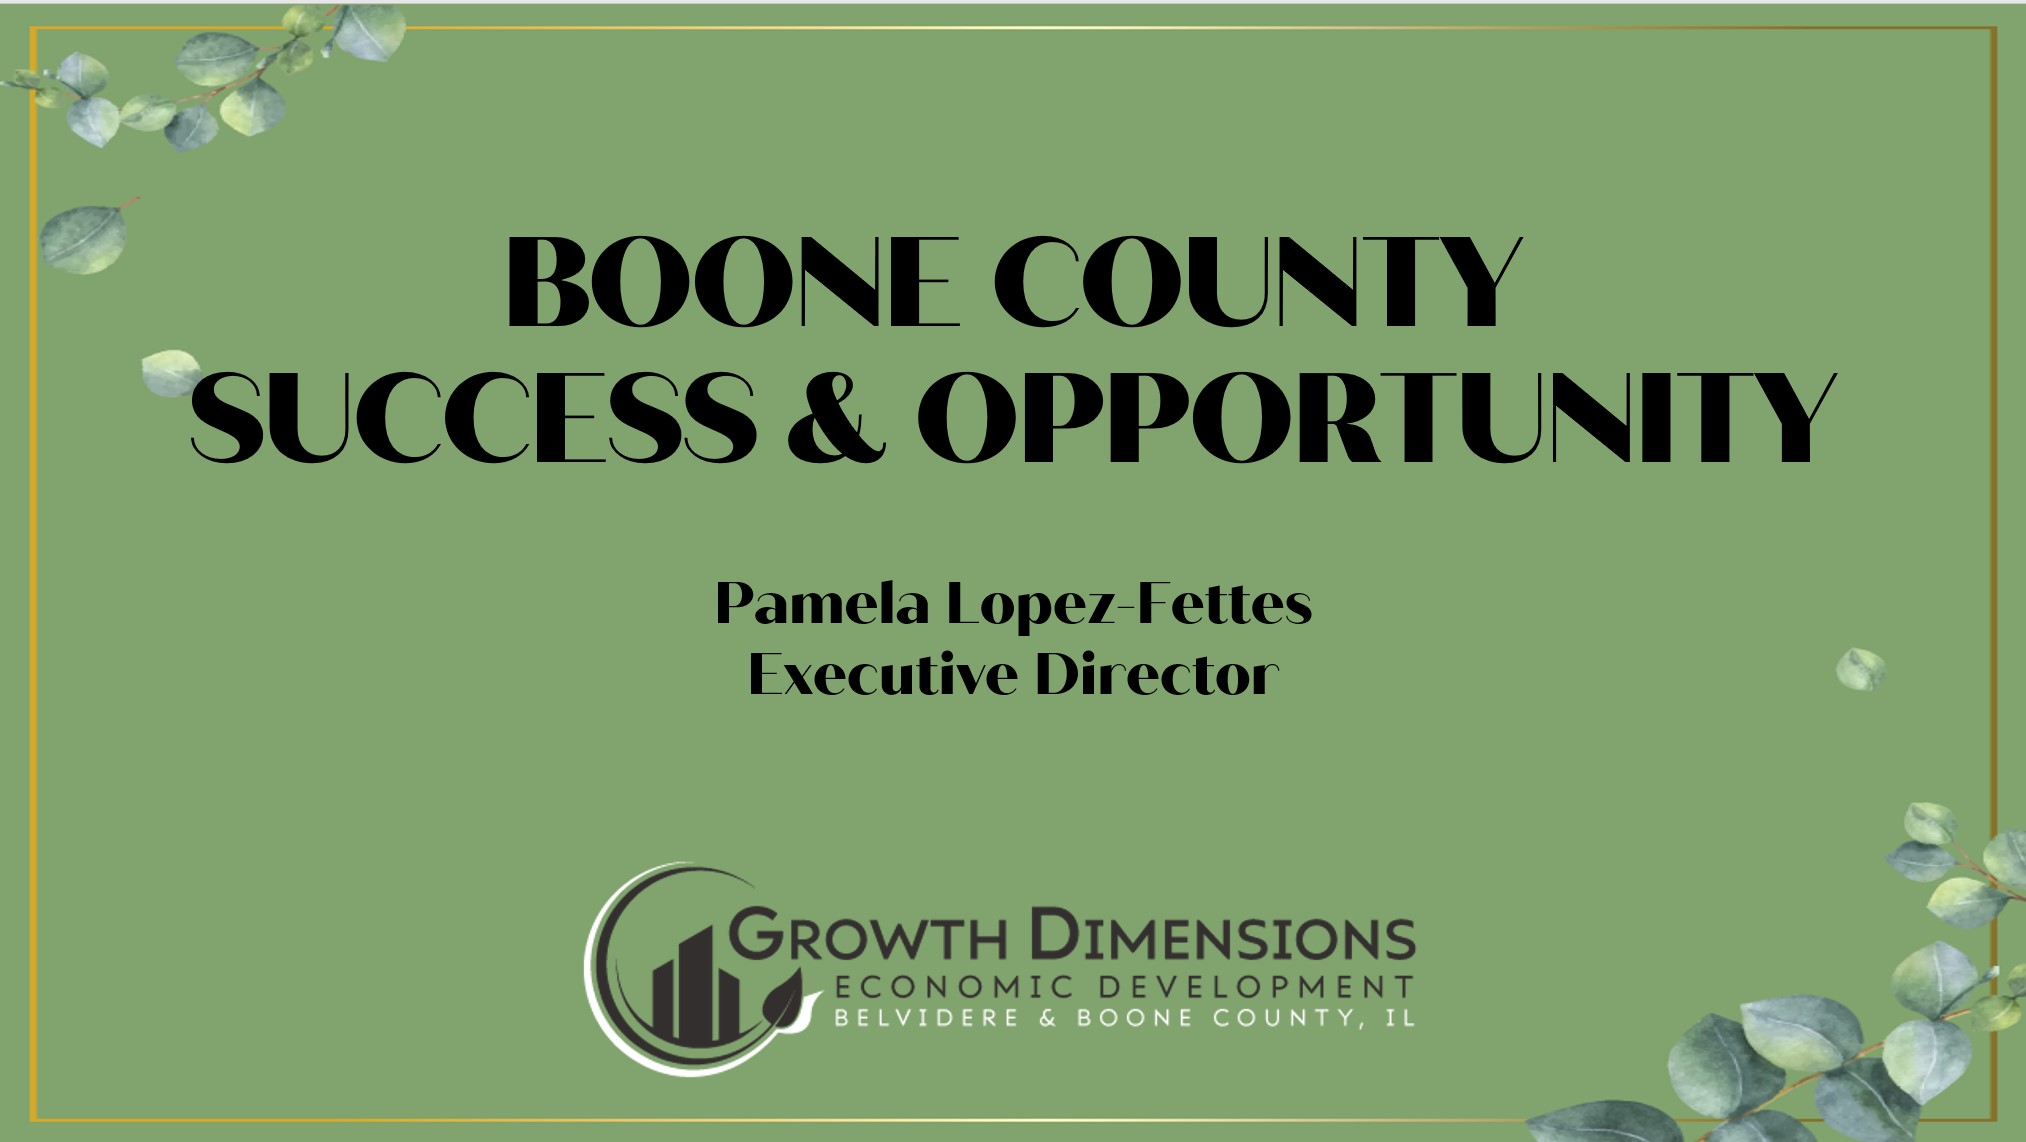 SUCCESS AND OPPORTUNITY IN BOONE COUNTY ILLINOIS Main Photo